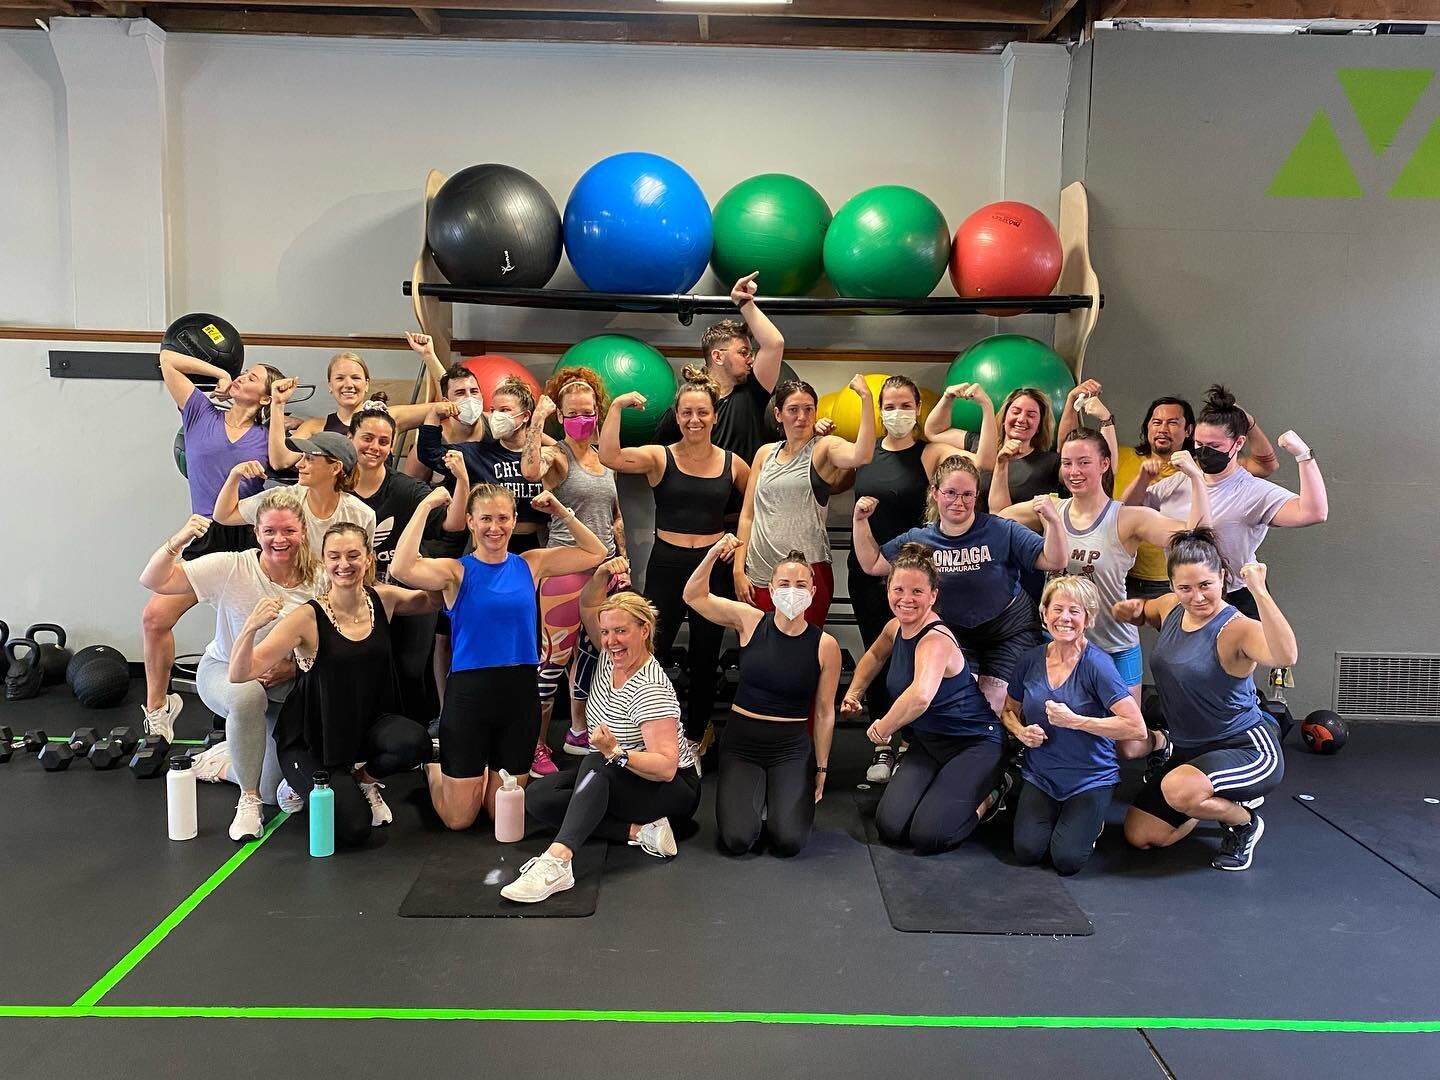 The biggest thank you to all that came to my donation based class today with ALL proceeds going to @plannedparenthood !! 

Thank you to @vivefitnesspdx for letting us take over the gym and kick ass for a good cause 💪❤️

You all have made my day and 